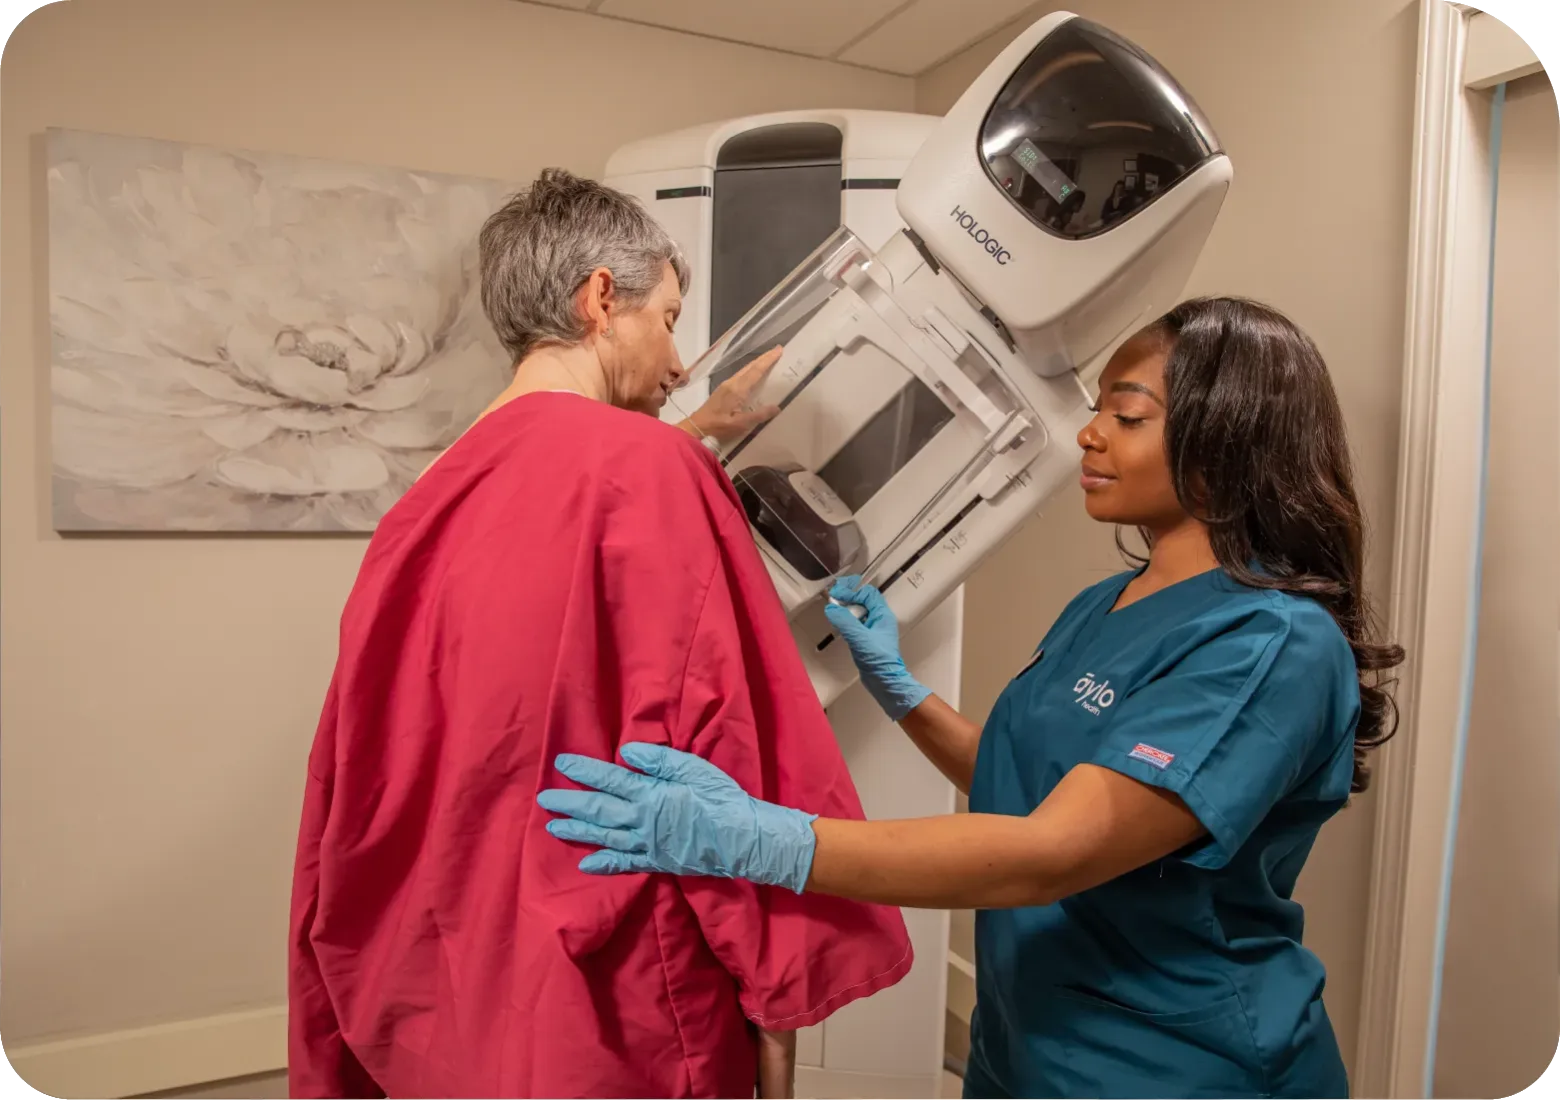 An Aylo nurse is standing next to a patient who is getting her mammogram.